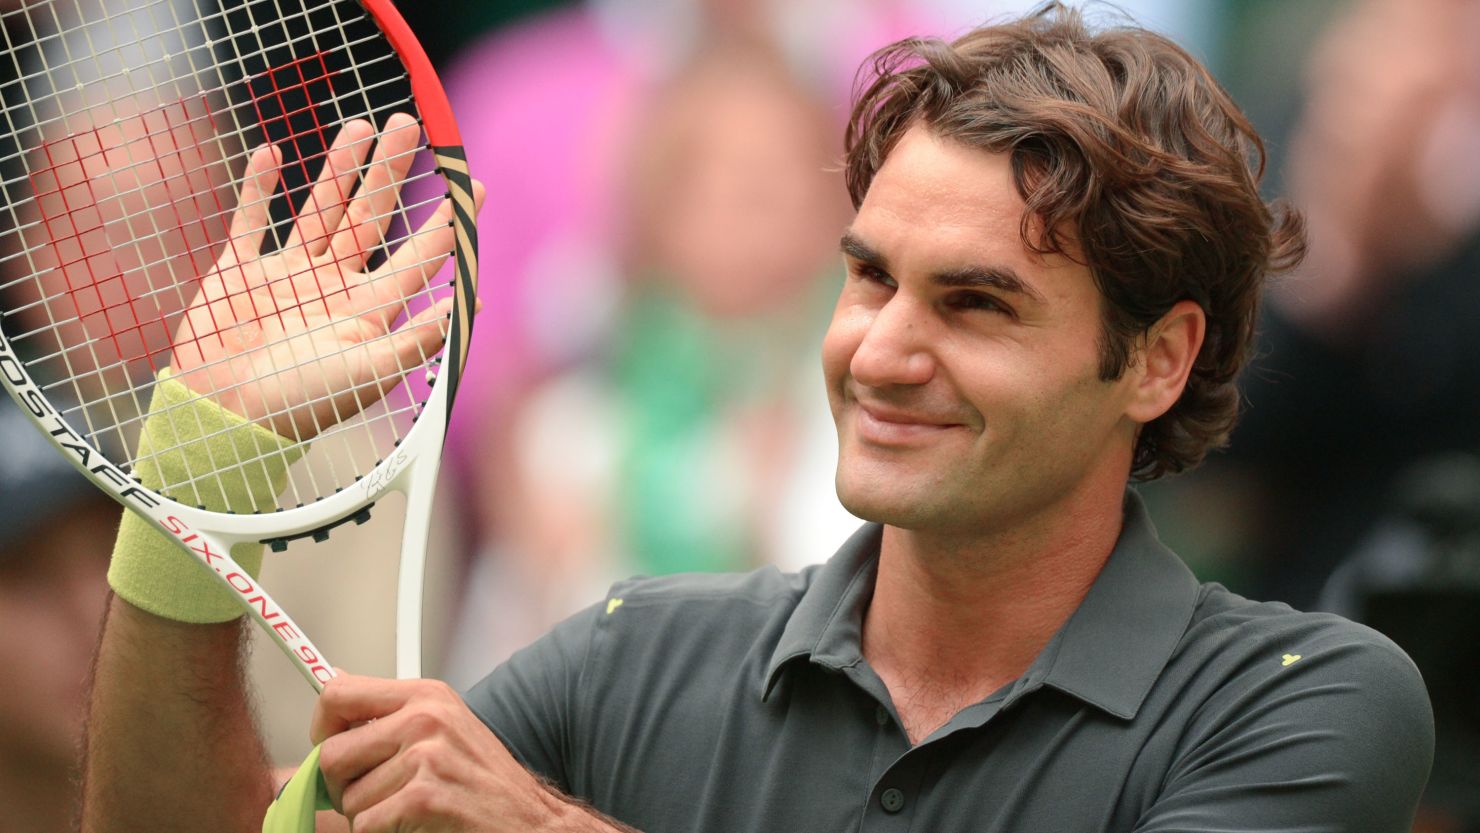 Swiss tennis star Roger Federer smiles after winning his semifinal against Mikhail Youzhny in Halle.